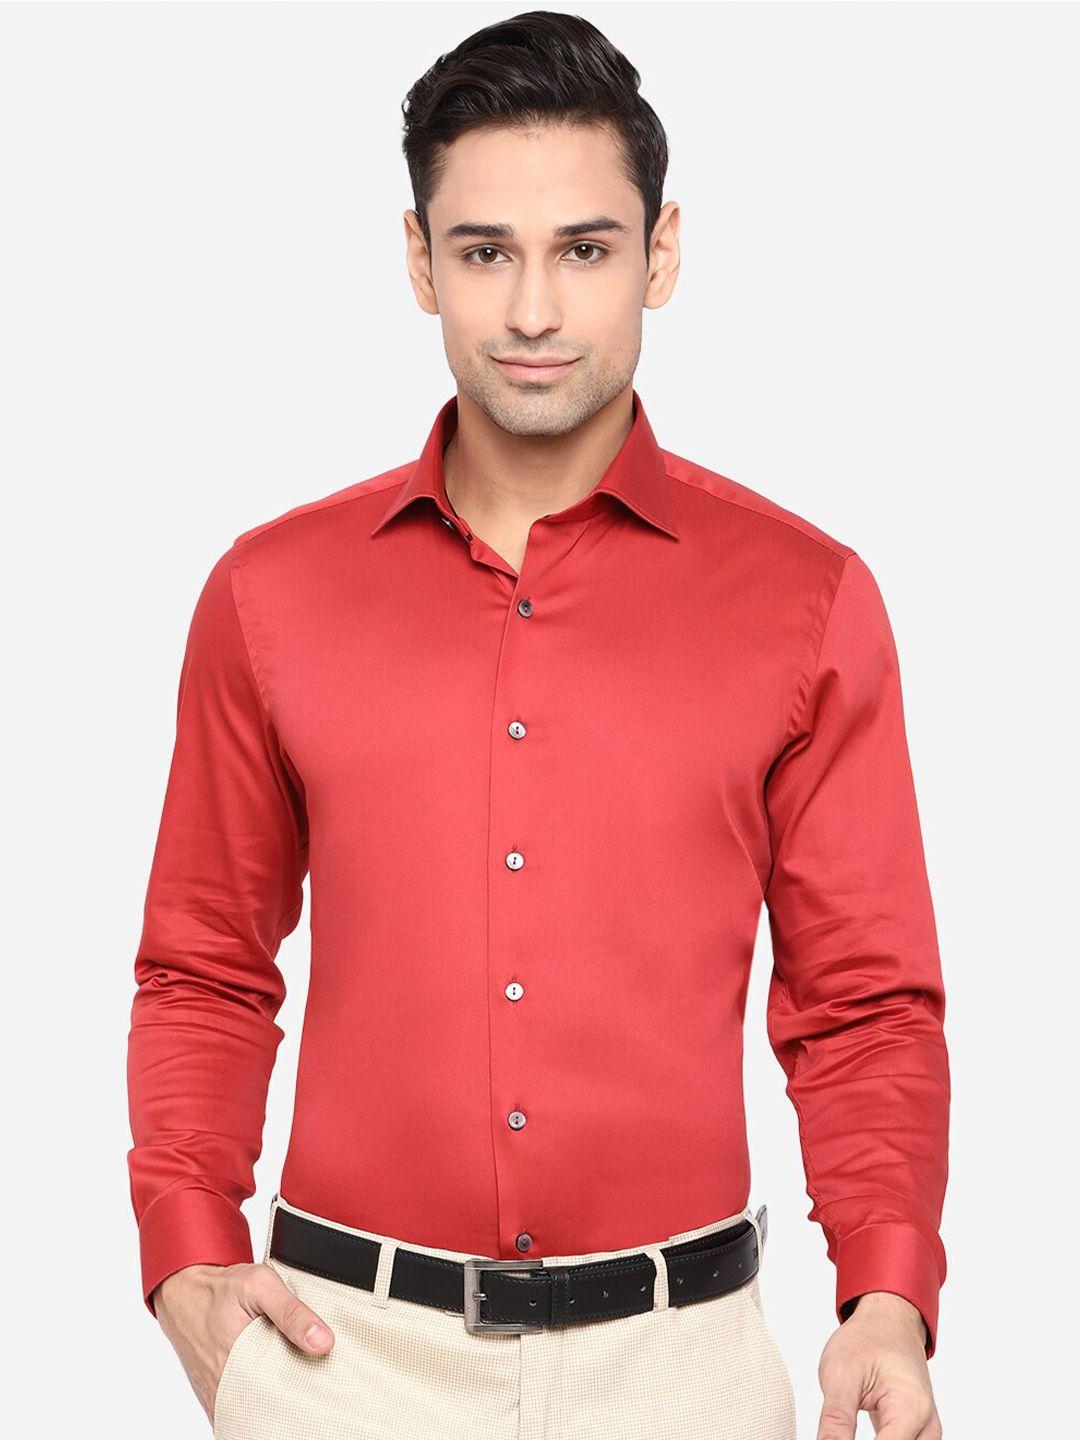 wyre-men-red-slim-fit-pure-cotton-formal-shirt